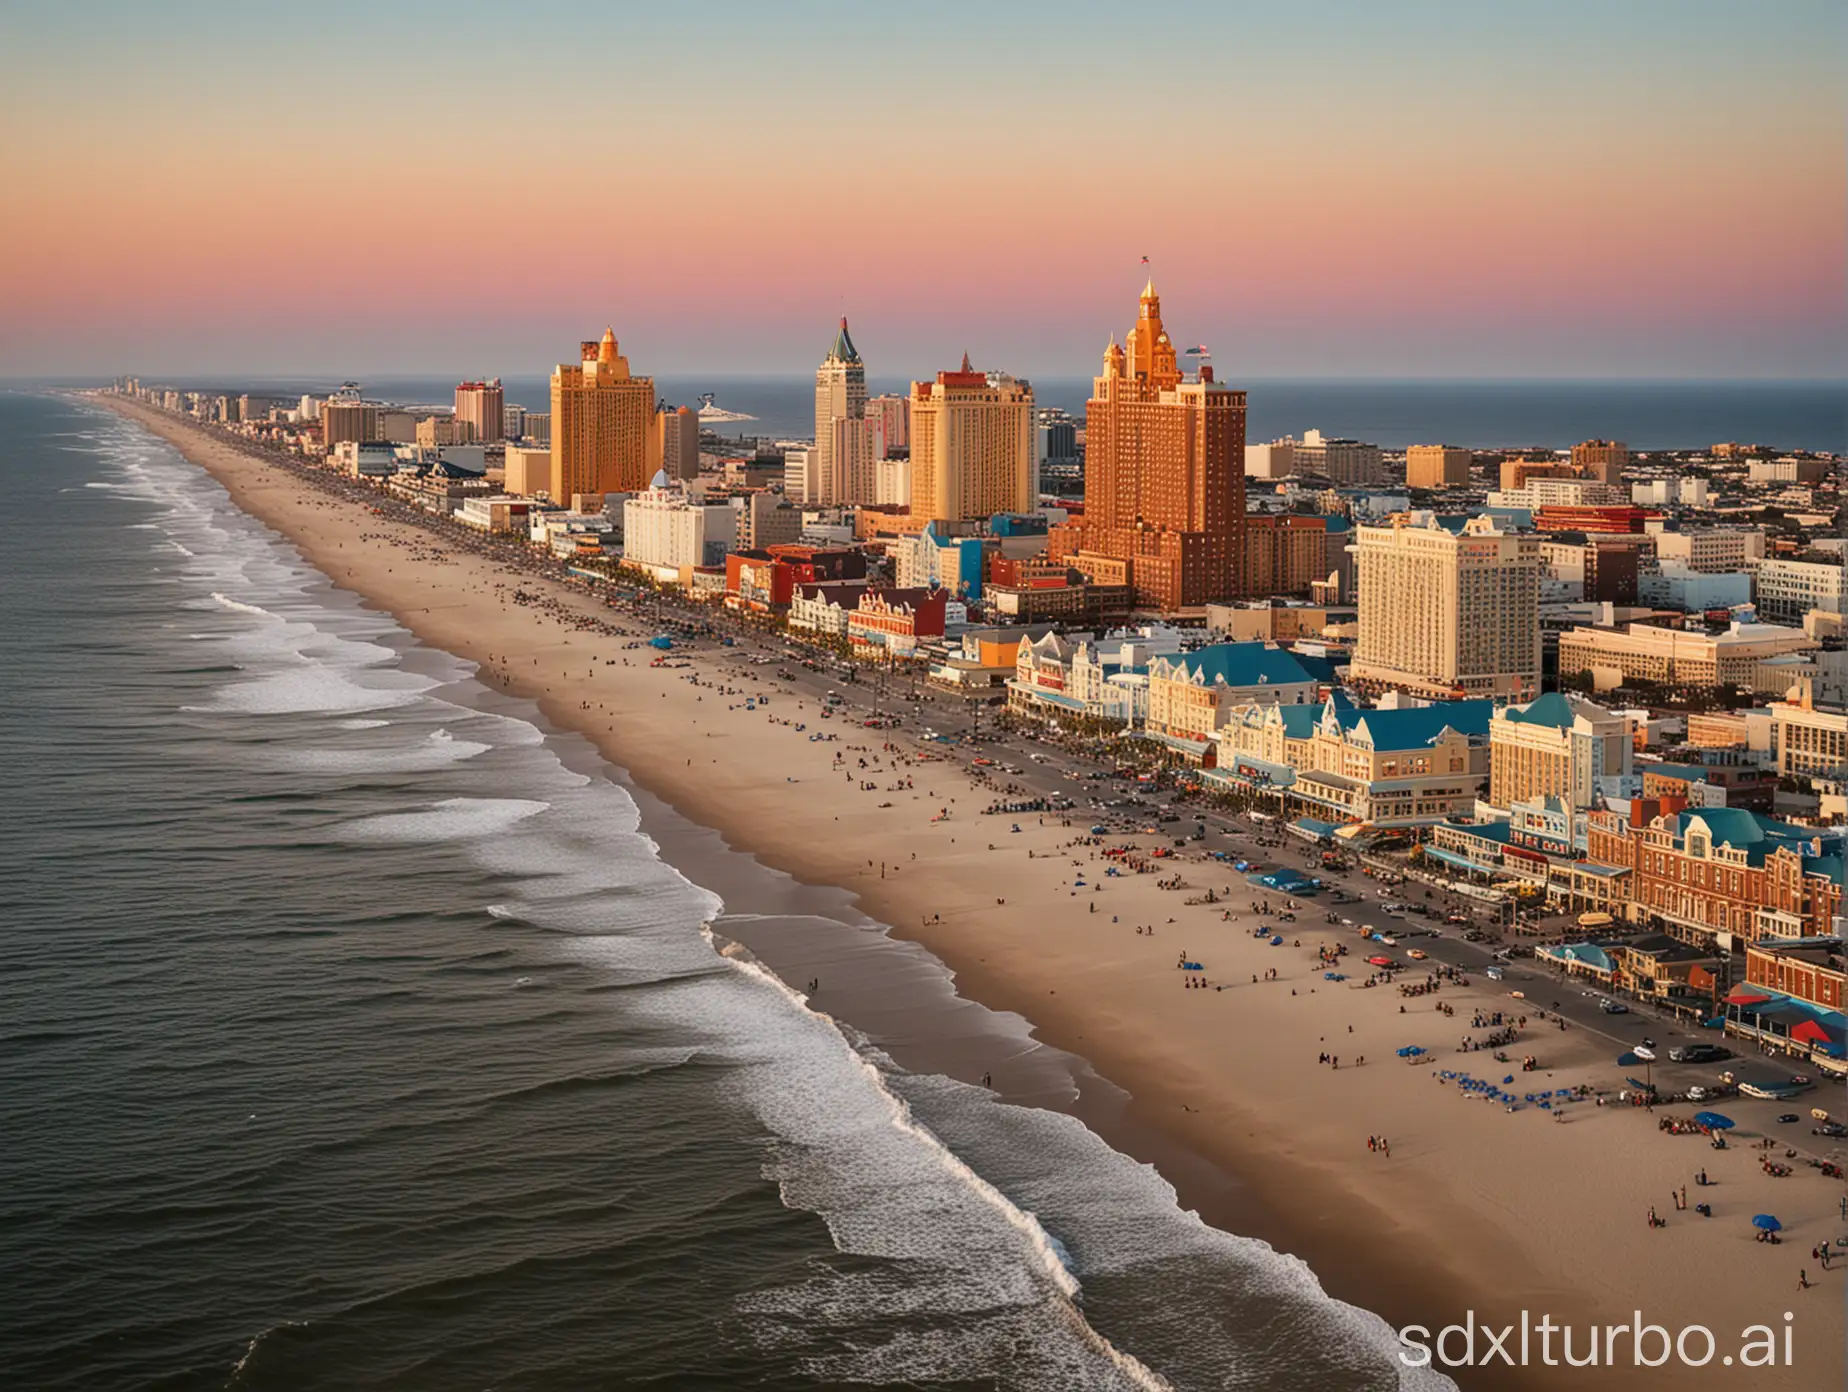 Scene Description:  Location: Aerial view of Atlantic City, New Jersey, USA. Time of Day: Sunset, with warm, golden hues illuminating the scene. Sky: Clear with a few wispy clouds, transitioning from blue near the horizon to shades of orange and pink overhead. Ocean: The Atlantic Ocean, shimmering with reflections of the setting sun, exhibiting varying shades of blue from deep navy to turquoise near the shore. Beach: A wide sandy beach extending along the shoreline, with gentle waves lapping against it. Boardwalk: A bustling boardwalk running parallel to the beach, lined with colorful shops, restaurants, and casinos. Buildings: Tall, modern buildings interspersed with iconic landmarks like the Steel Pier and the Atlantic City Convention Center. Lights: Bright neon lights adorning the buildings and casinos, creating a vibrant and lively atmosphere. People: Diverse crowds of people strolling along the boardwalk, enjoying the evening, some carrying balloons and cotton candy. Landmarks: Include the Trump Taj Mahal (now Hard Rock Hotel 